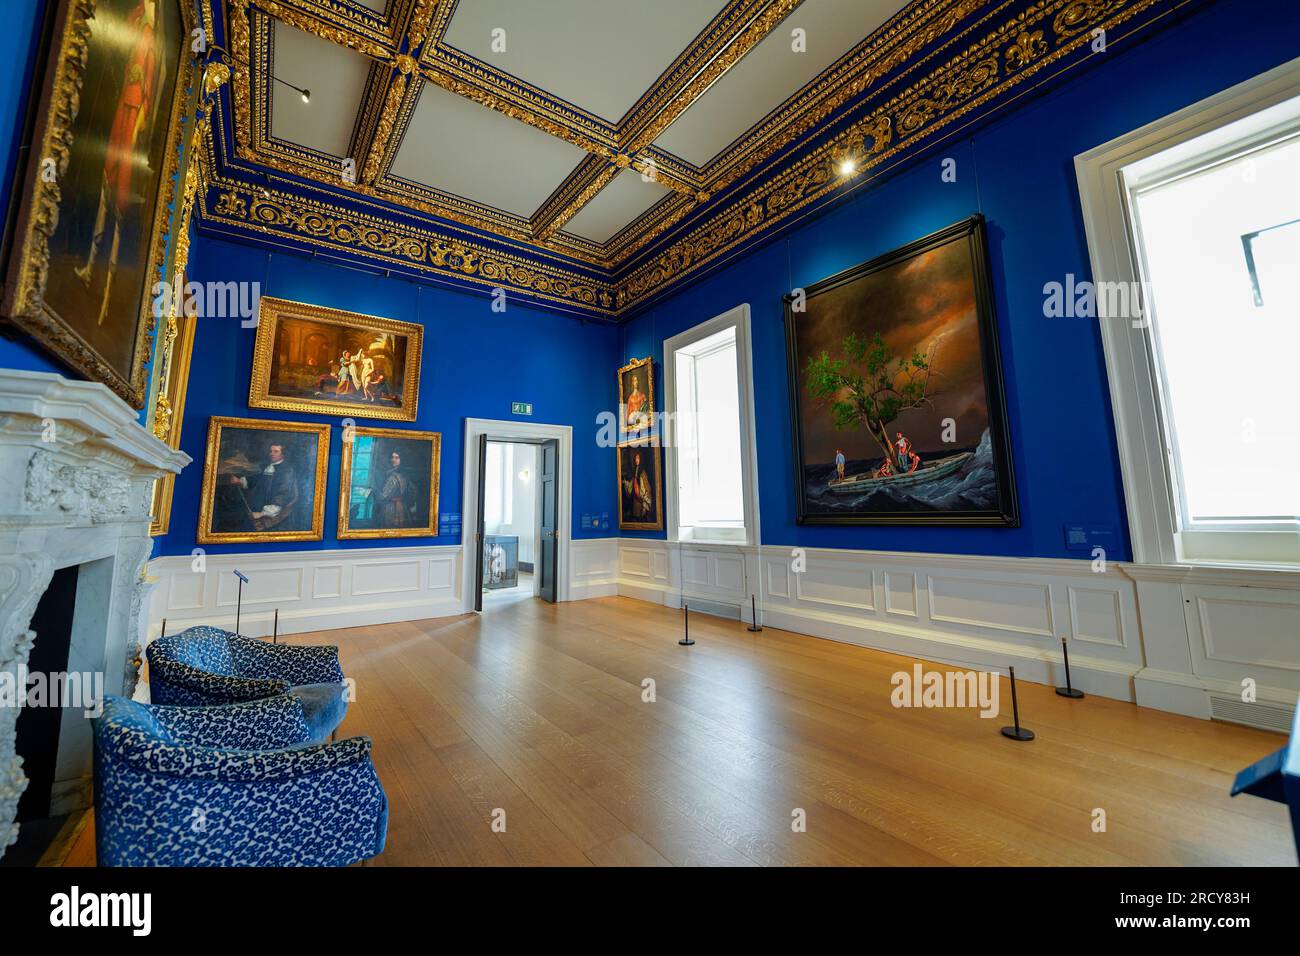 Queen's House Greenwich, London. Museum interior, art gallery housed inside a historic neoclassical building, the first Classical building in the UK. Stock Photo